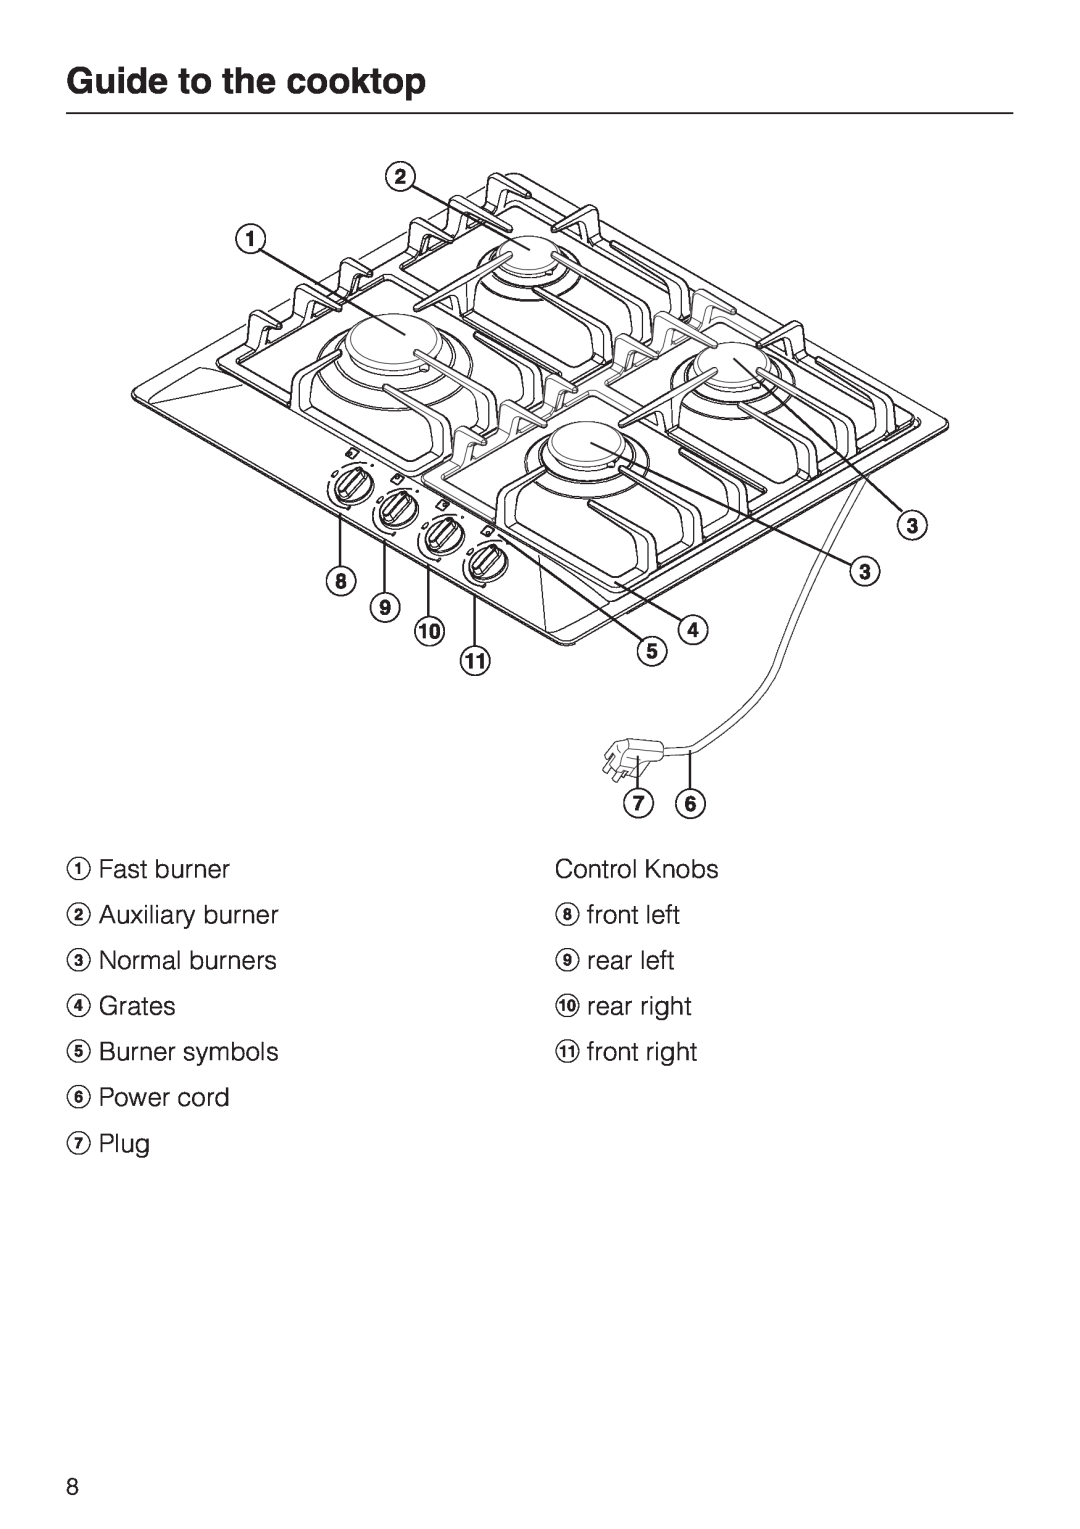 Miele KM 360 operating instructions Guide to the cooktop 